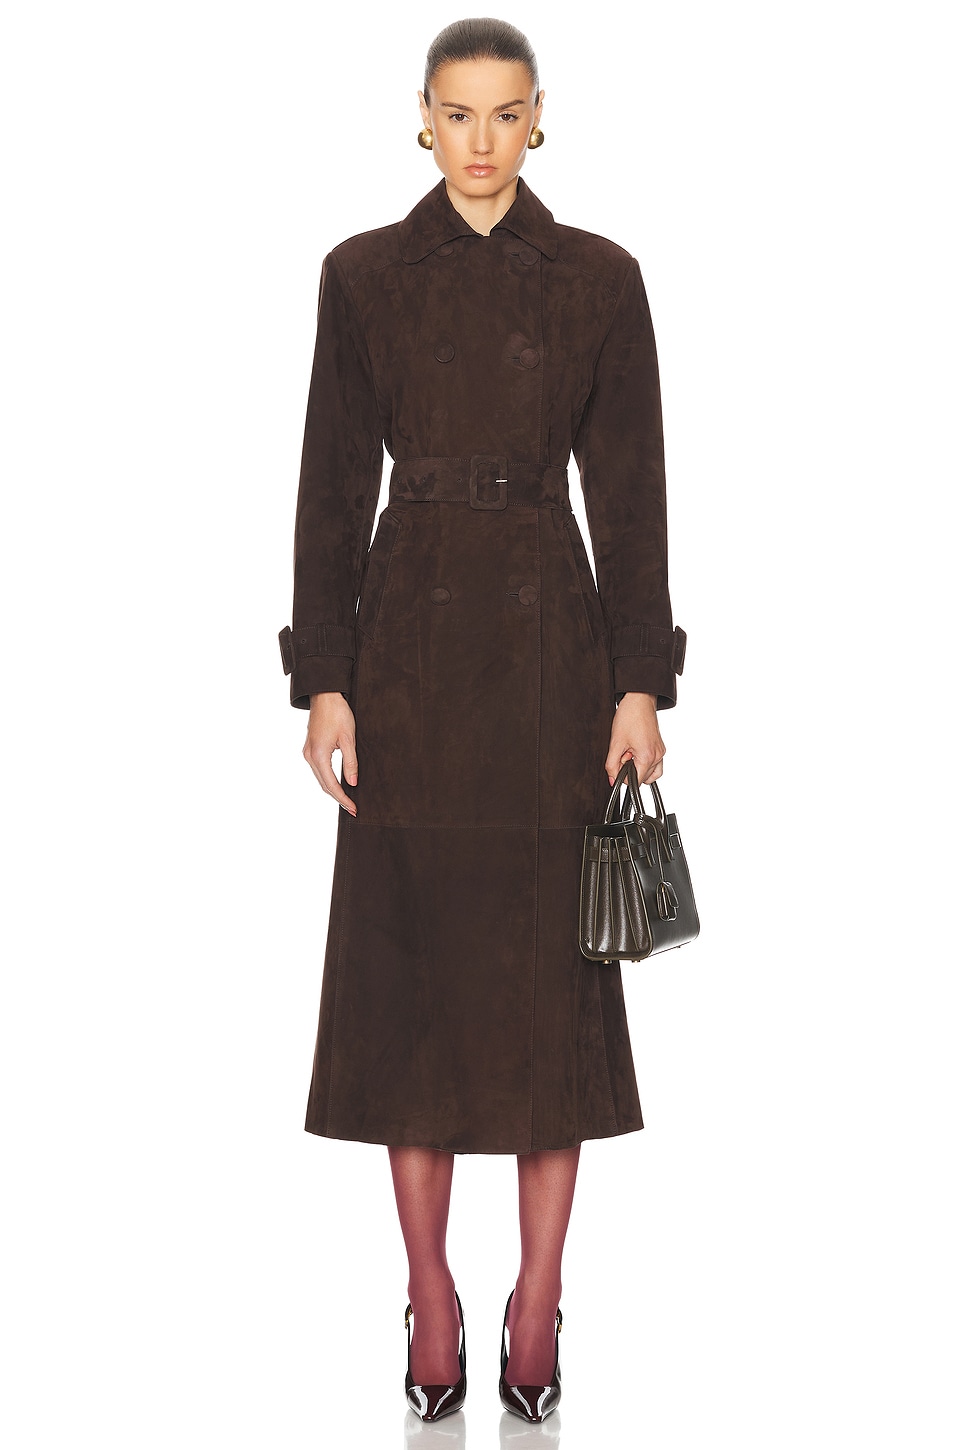 Image 1 of NOUR HAMMOUR Tate Suede Trench Coat in Mocha Suede